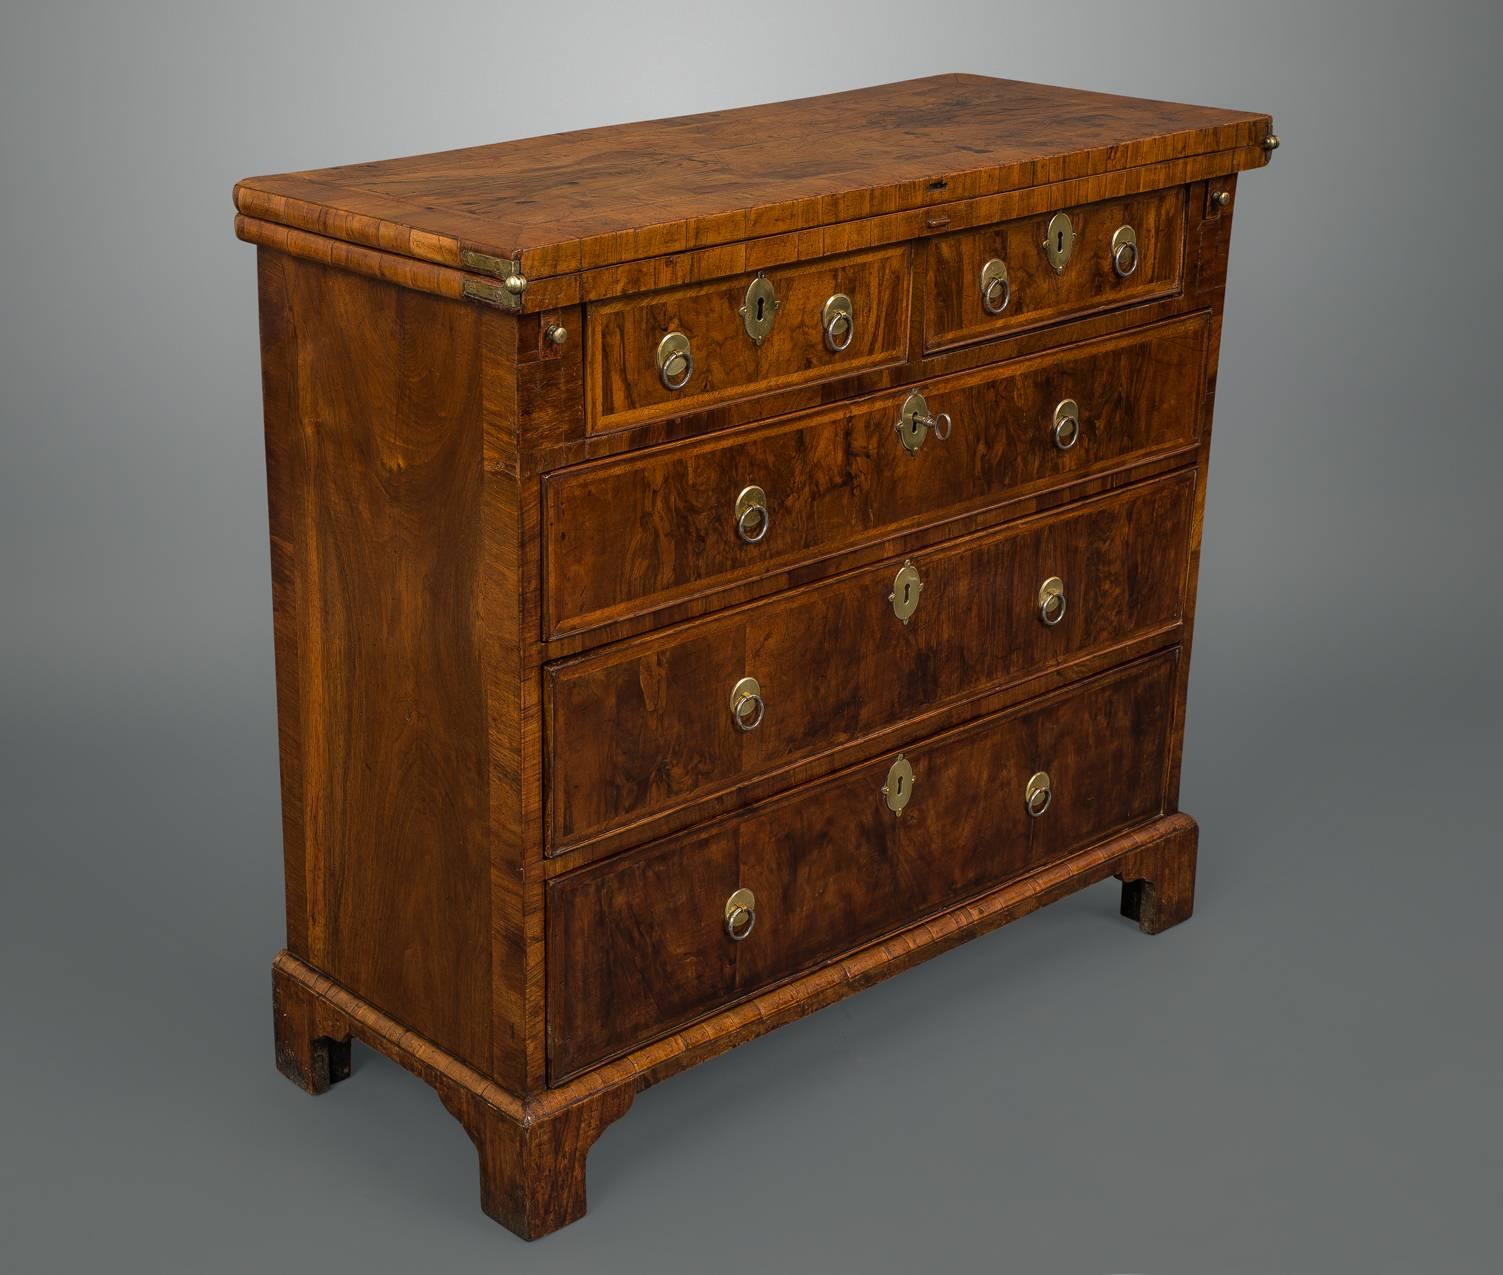 A fine walnut bachelors chest on bracket feet with a wonderful pale toffee color and the added benefit of original ring button handles, escutcheons, locks and hinges.

The top quarter veneered with feather and cross banding exhibiting many